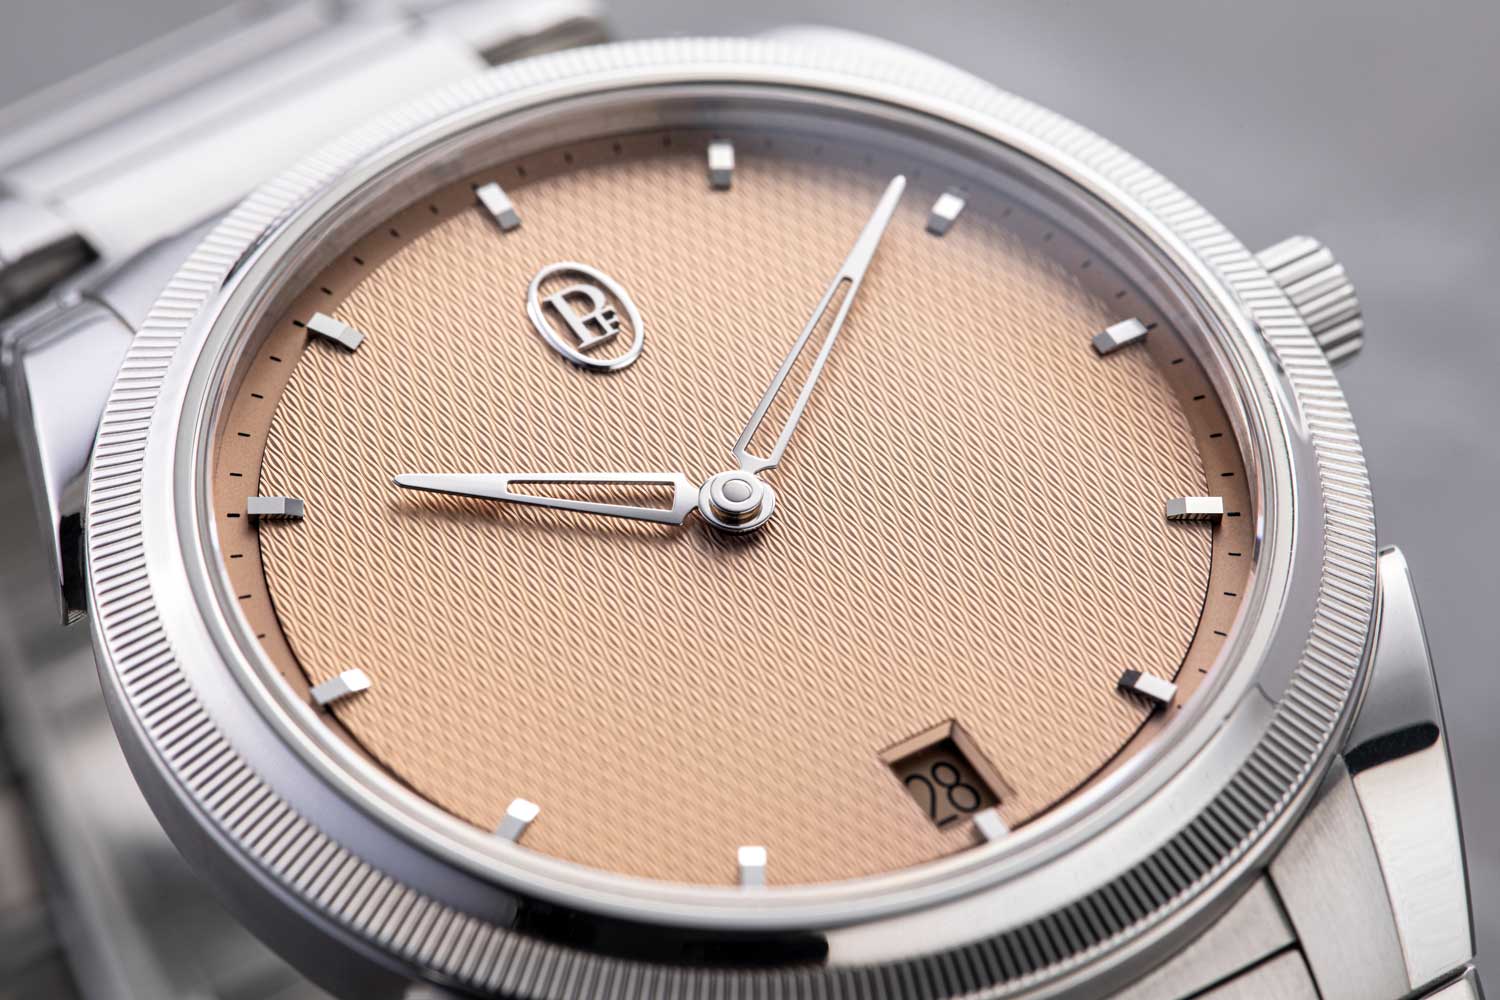 Surely a sign of its design perfection — the exquisite miniature guilloché pattern on the dial